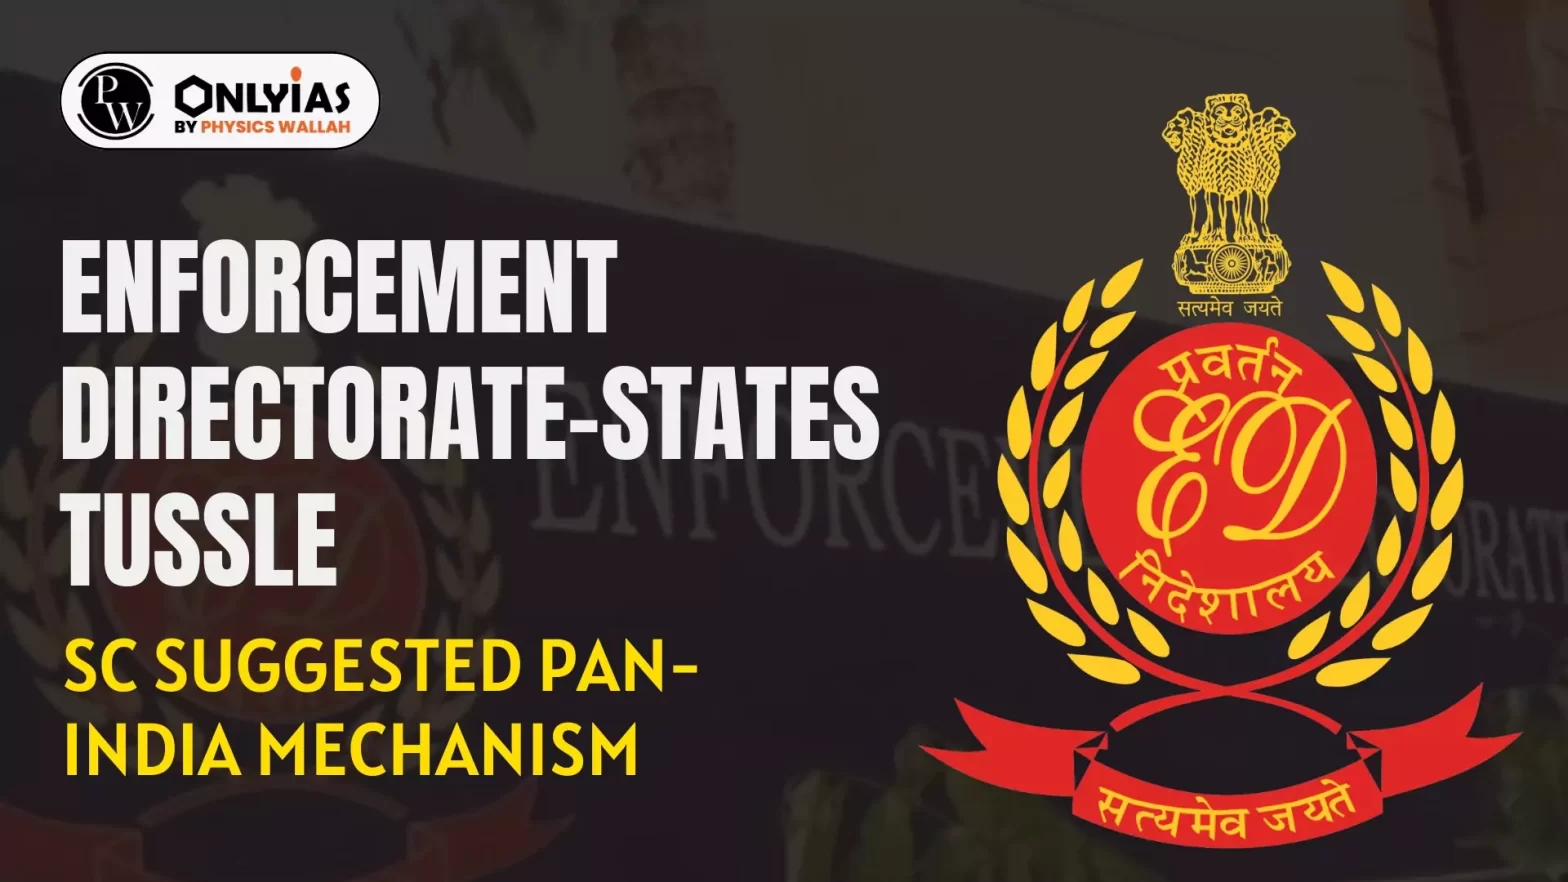 Enforcement Directorate-States Tussle: SC Suggested Pan-India Mechanism